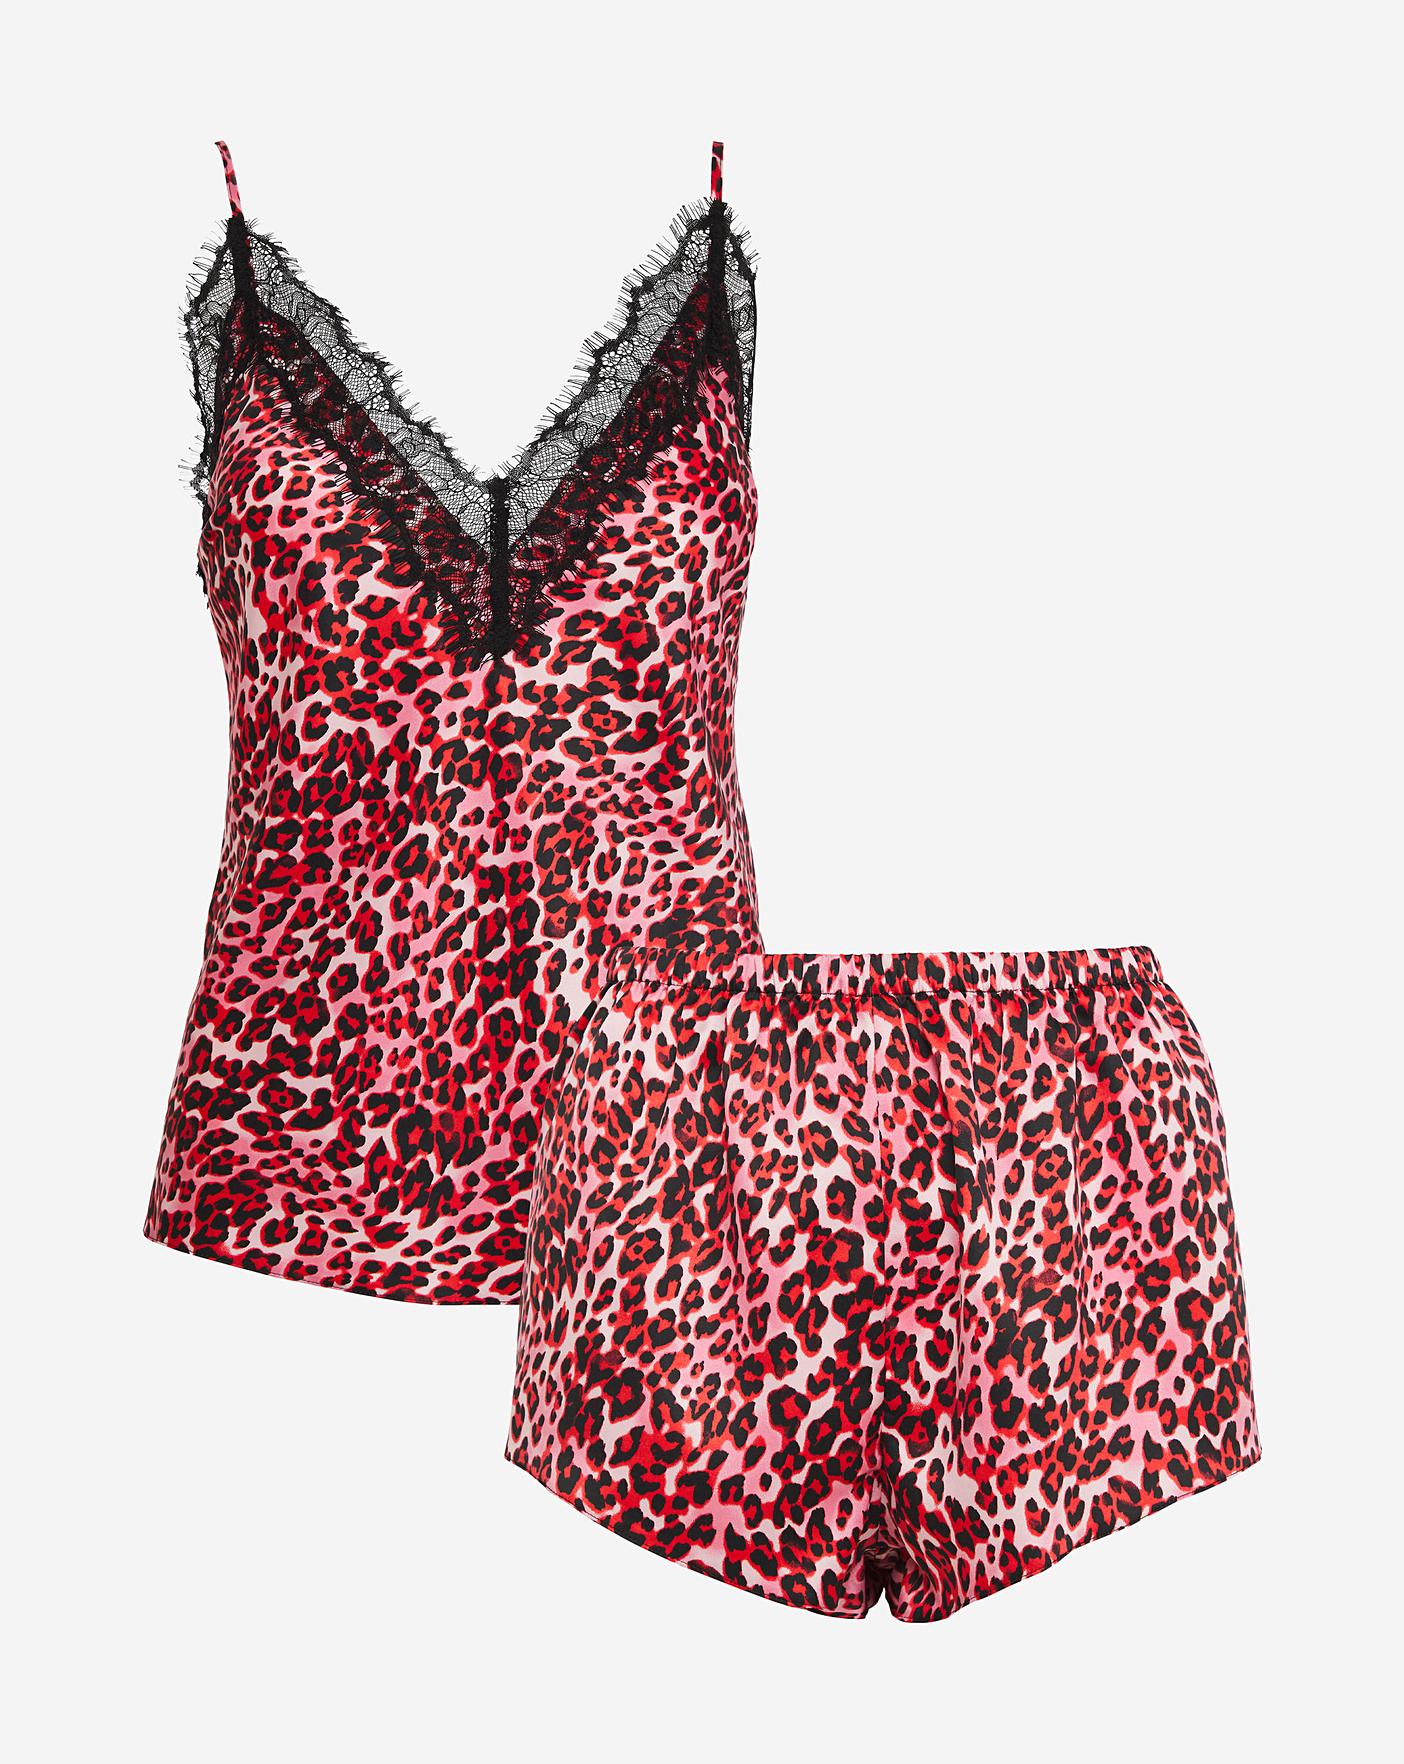 Cerise Cami Set by Ann Summers